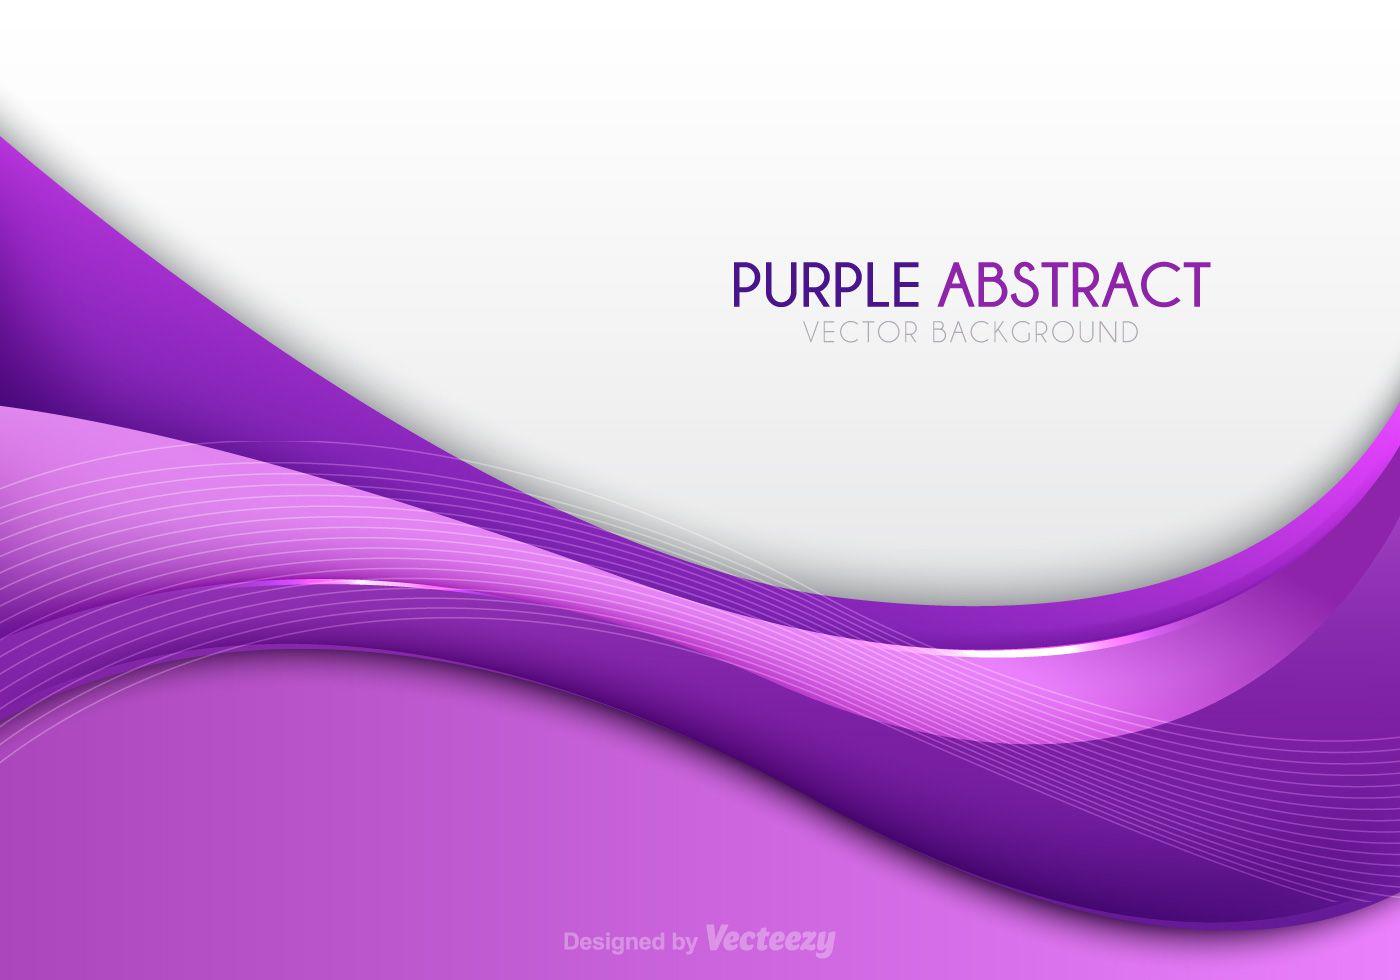 Purple Abstract Vector Background Free Vector Art, Stock